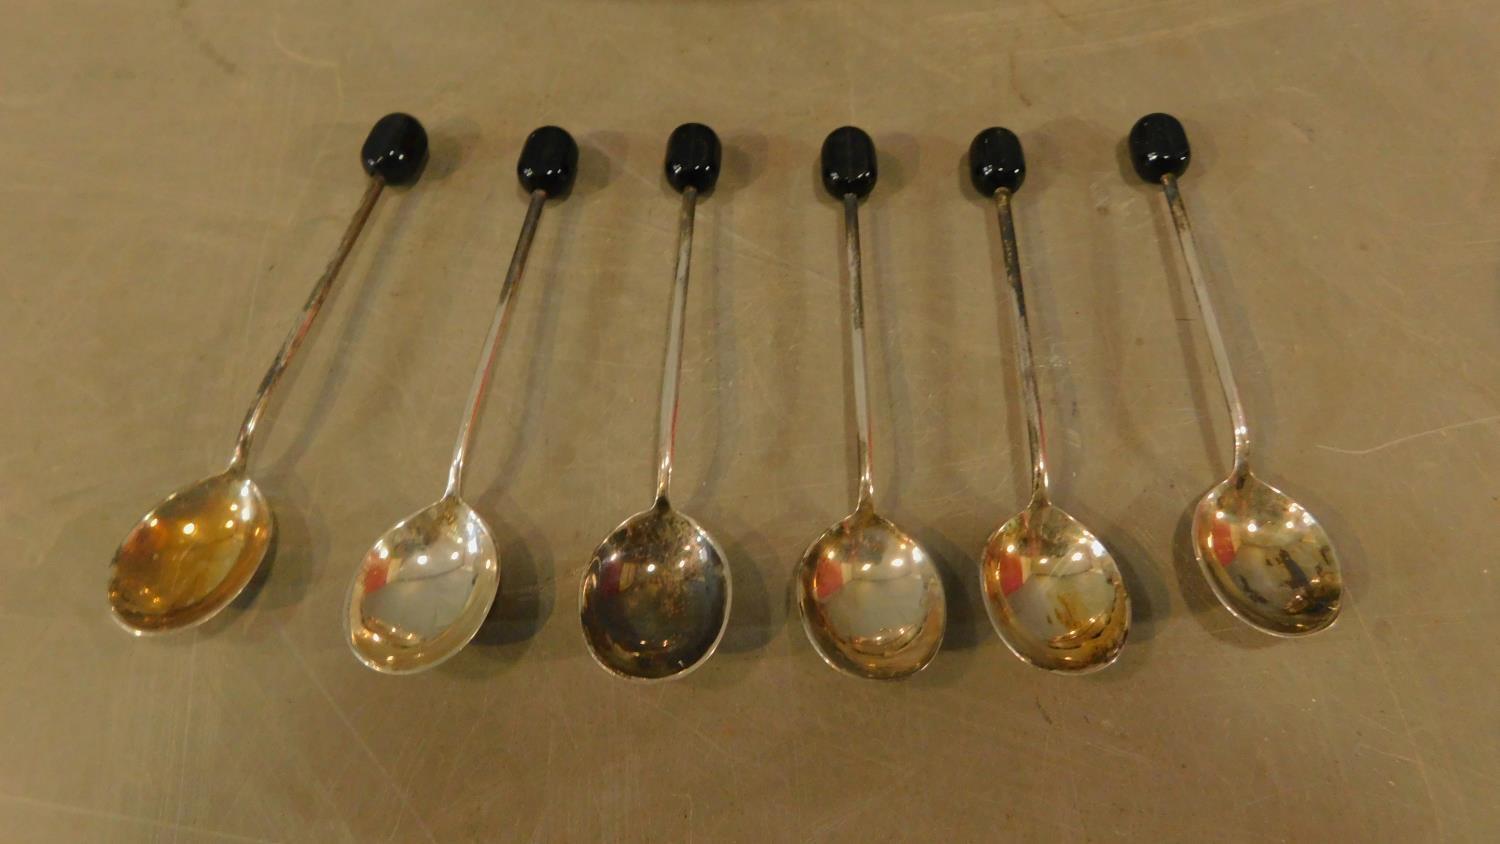 An Edwardian silver plated galleried tray, a lidded entree dish and a set of 6 coffee bean spoons. - Image 2 of 4